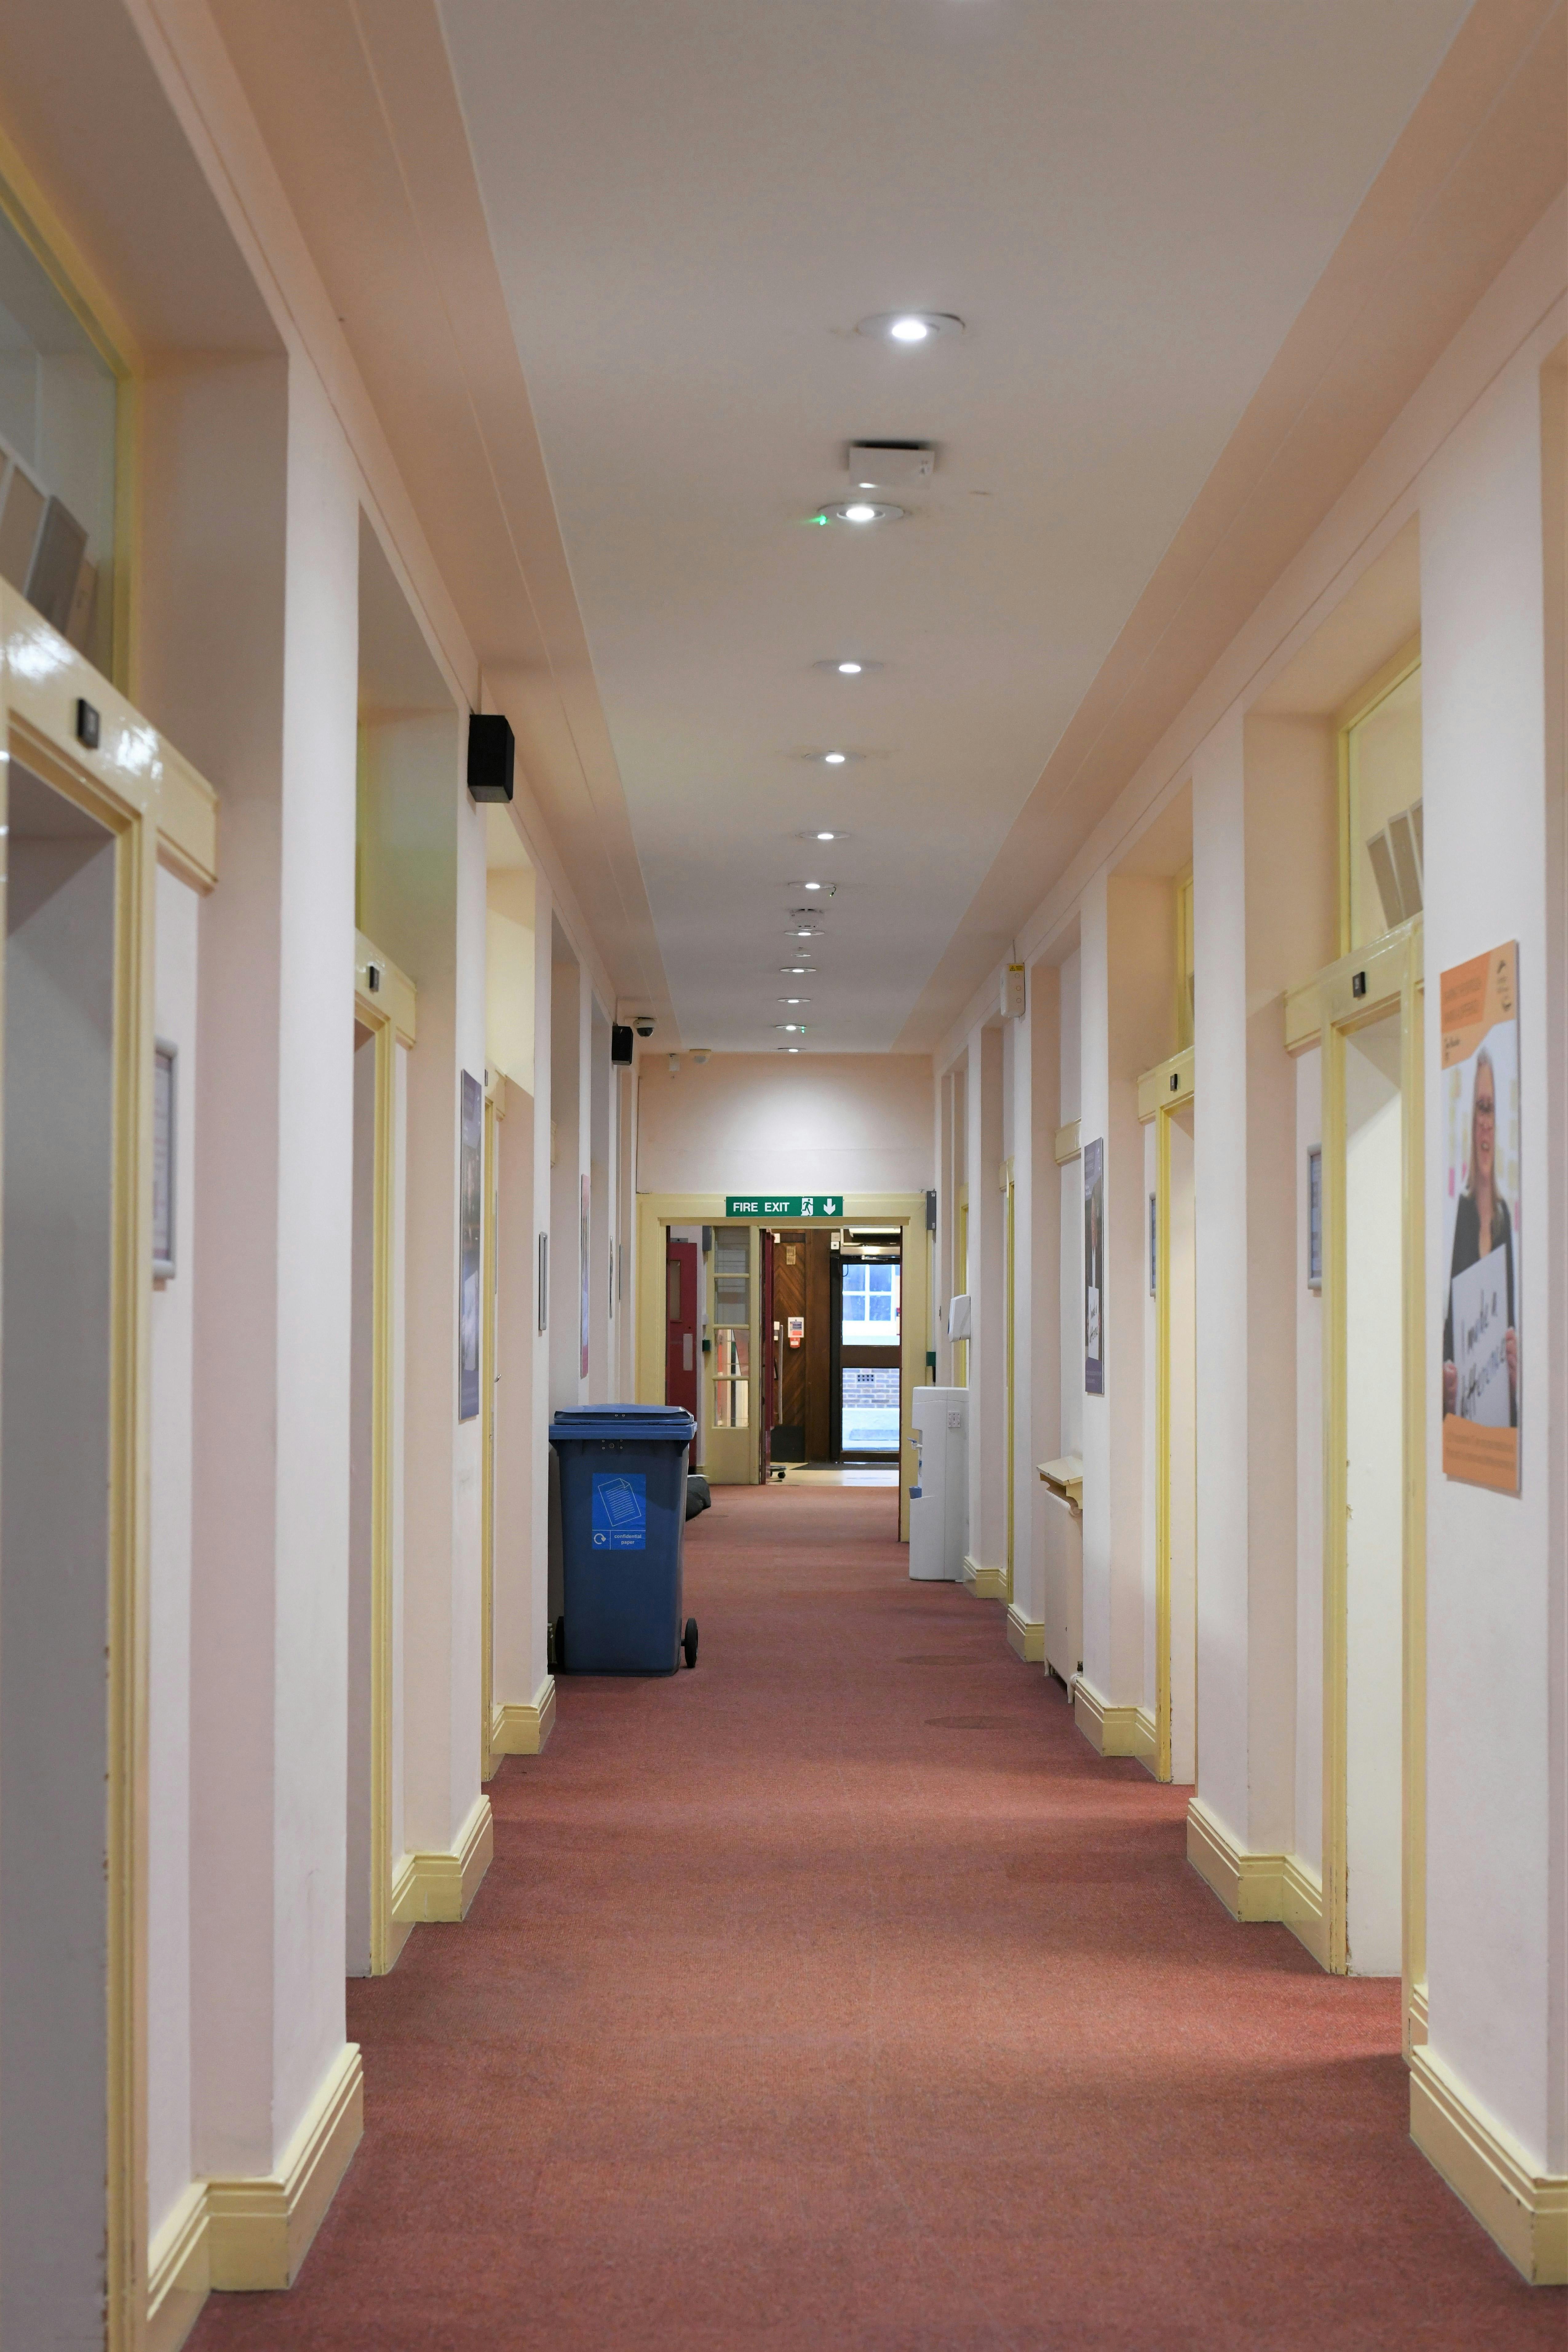 A corridor in the Town Hall